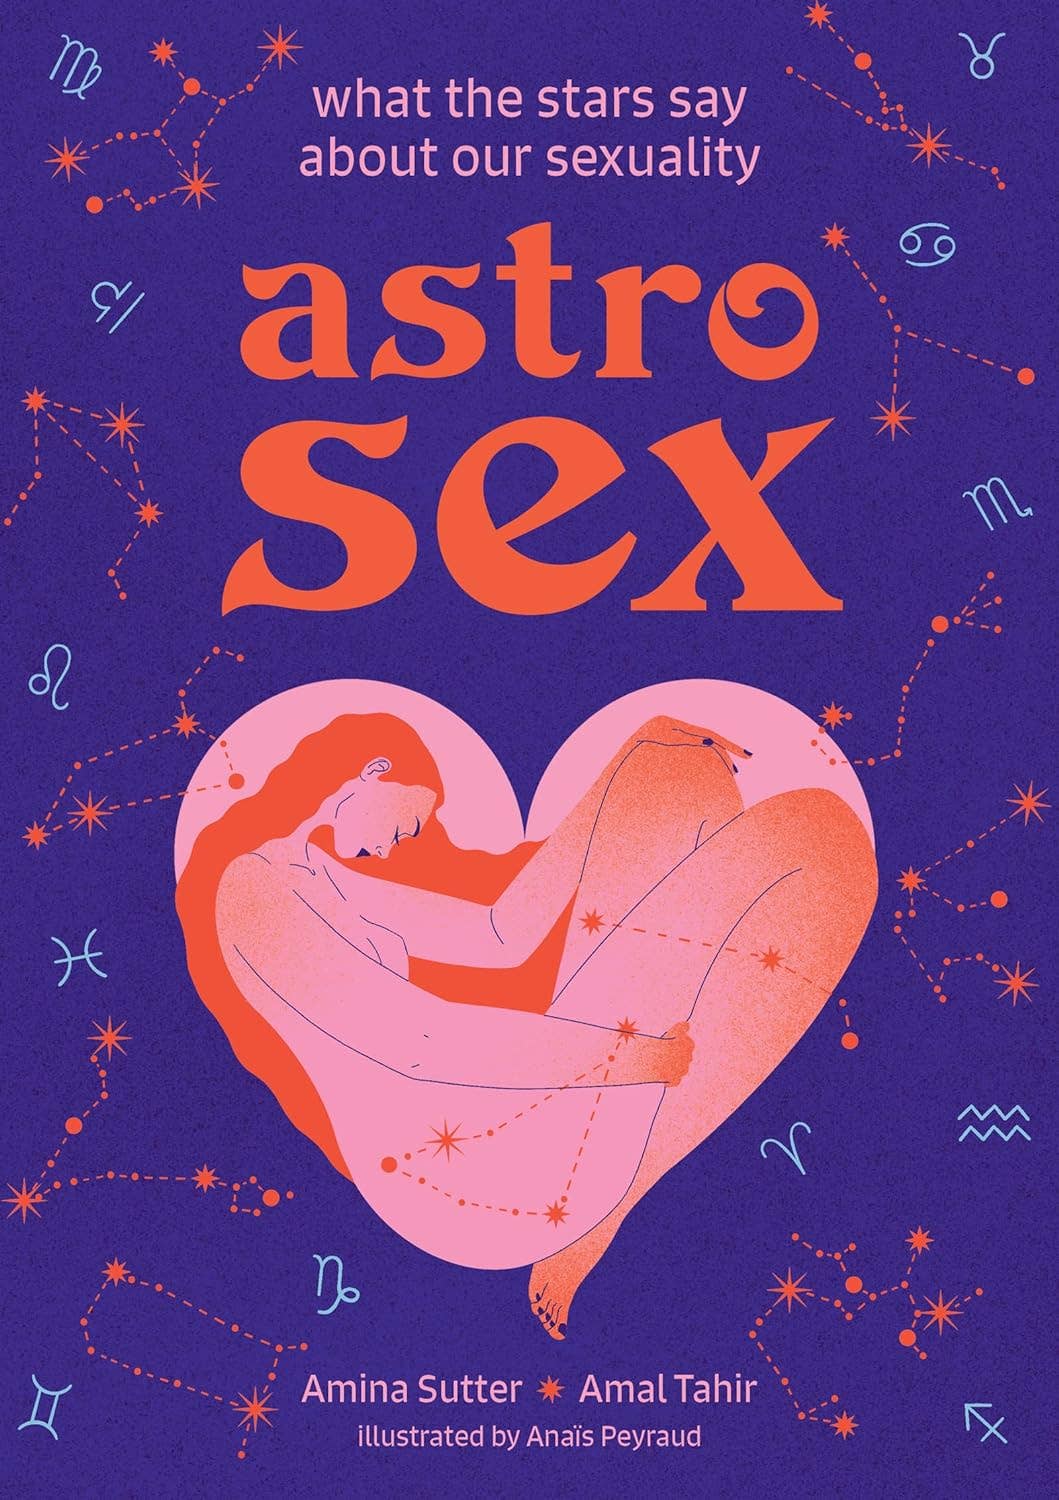 Astrosex: What the Stars Say About Our Sexuality - Spiral Circle